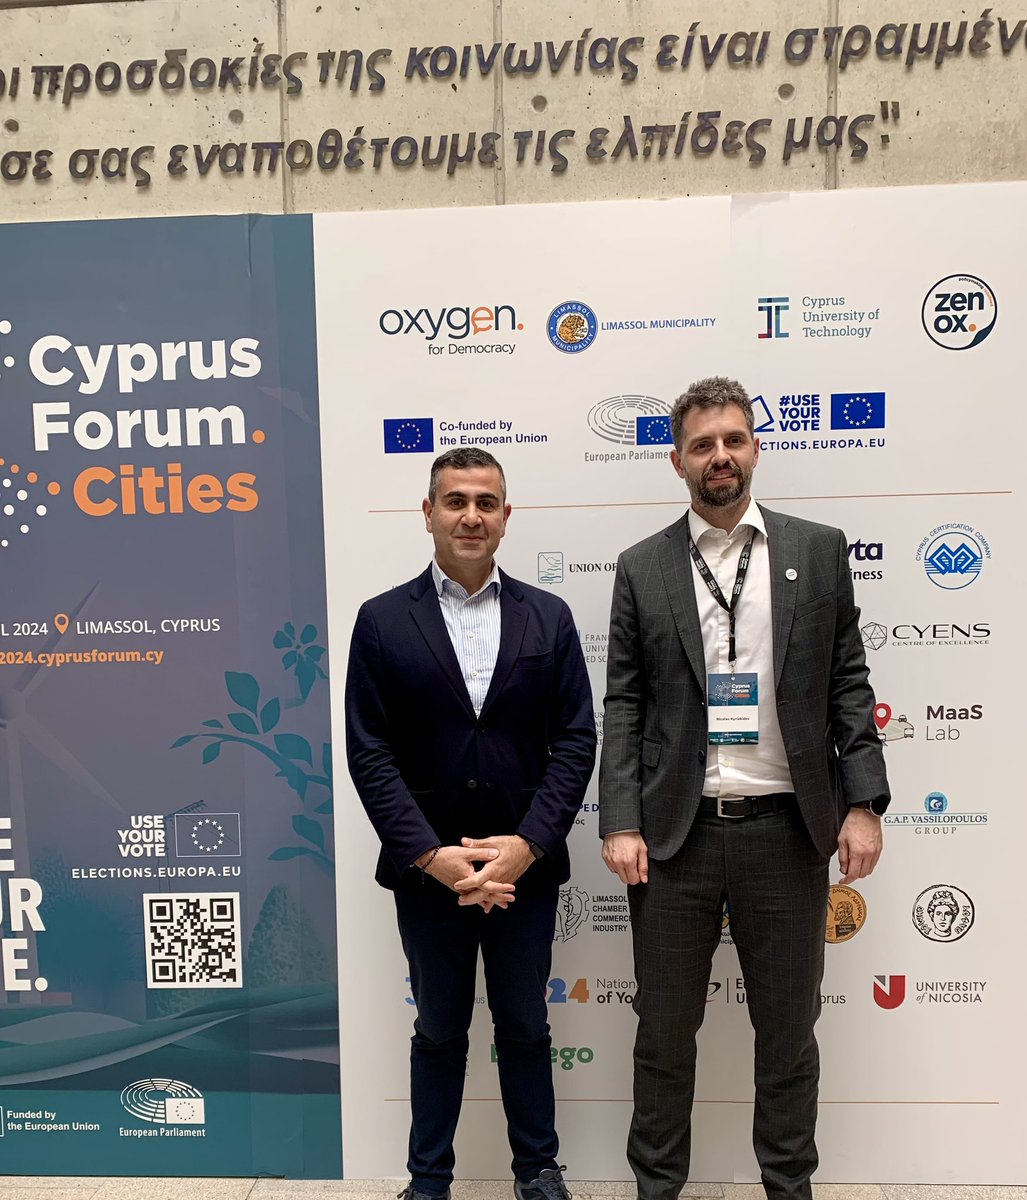 Participated today in a constructive panel discussion of #CyprusForumCities on “EU Elections: Why voting matters & what Europe does for me?” Sincere thanks for the kind invitation @NicKyriakides & @oxygendemocracy @Europarl_CY #UseYourVote